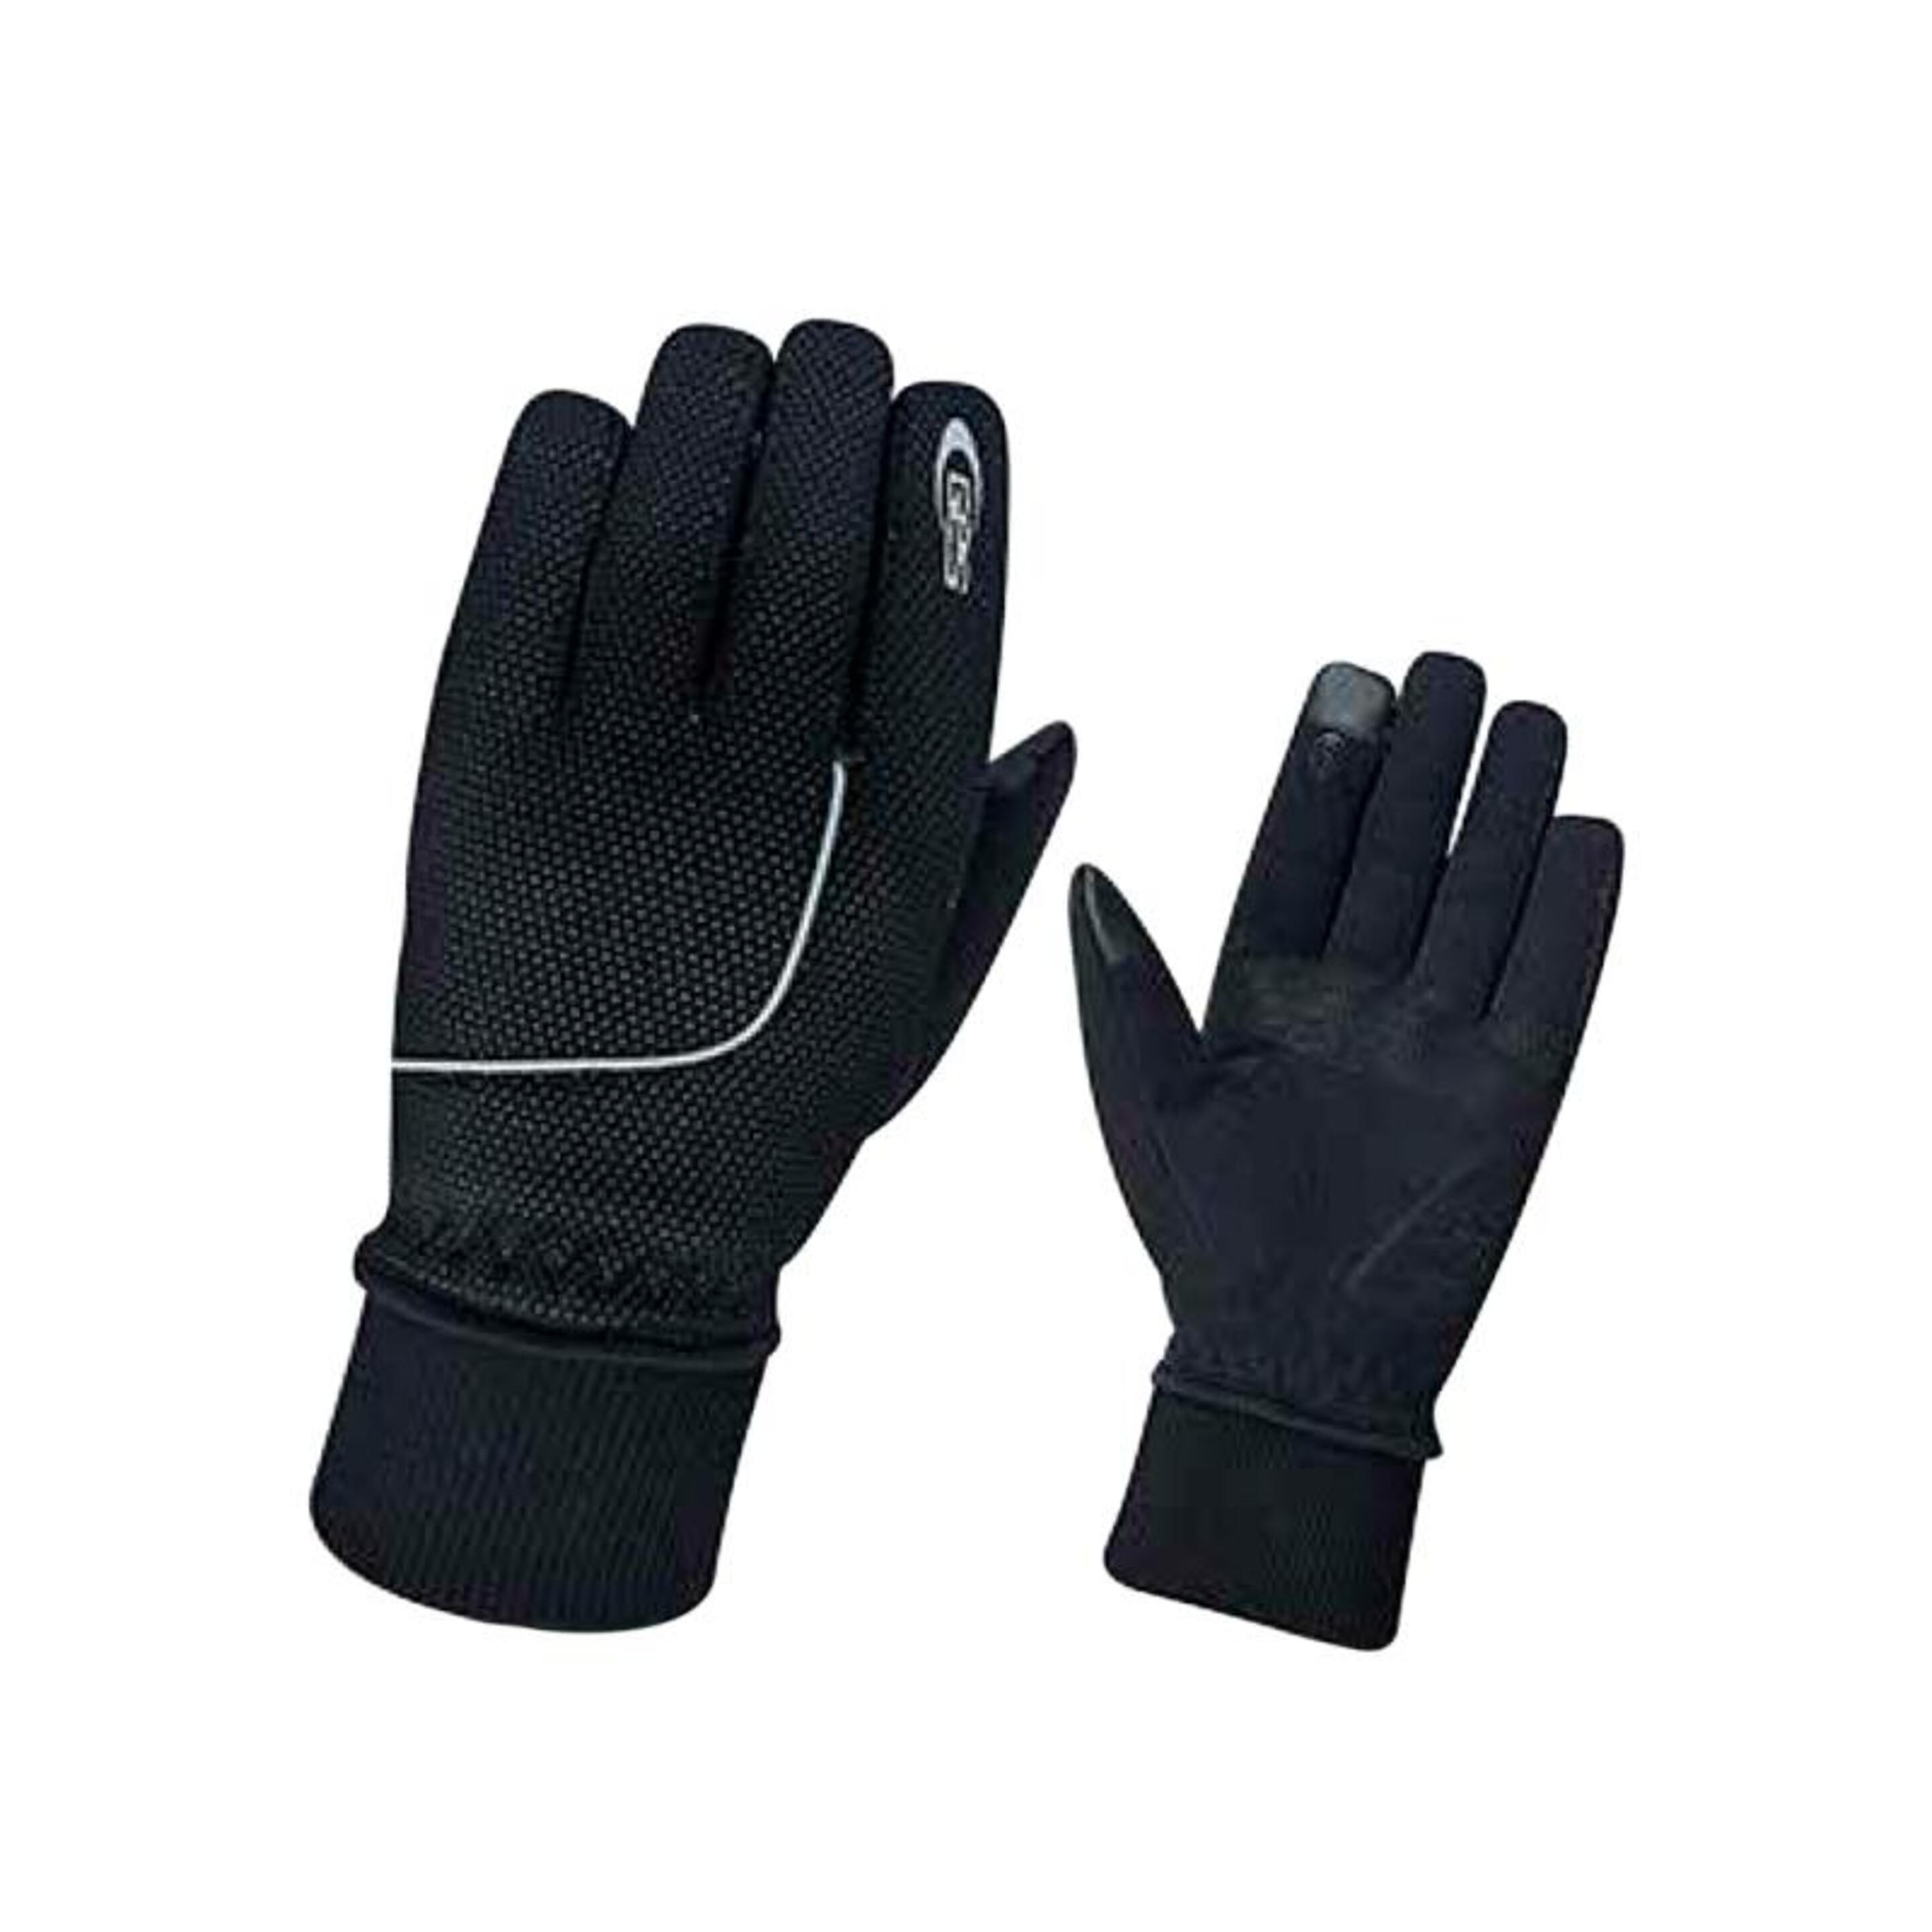 Guantes Ciclismo Ges Invierno Cooltech - negro - 